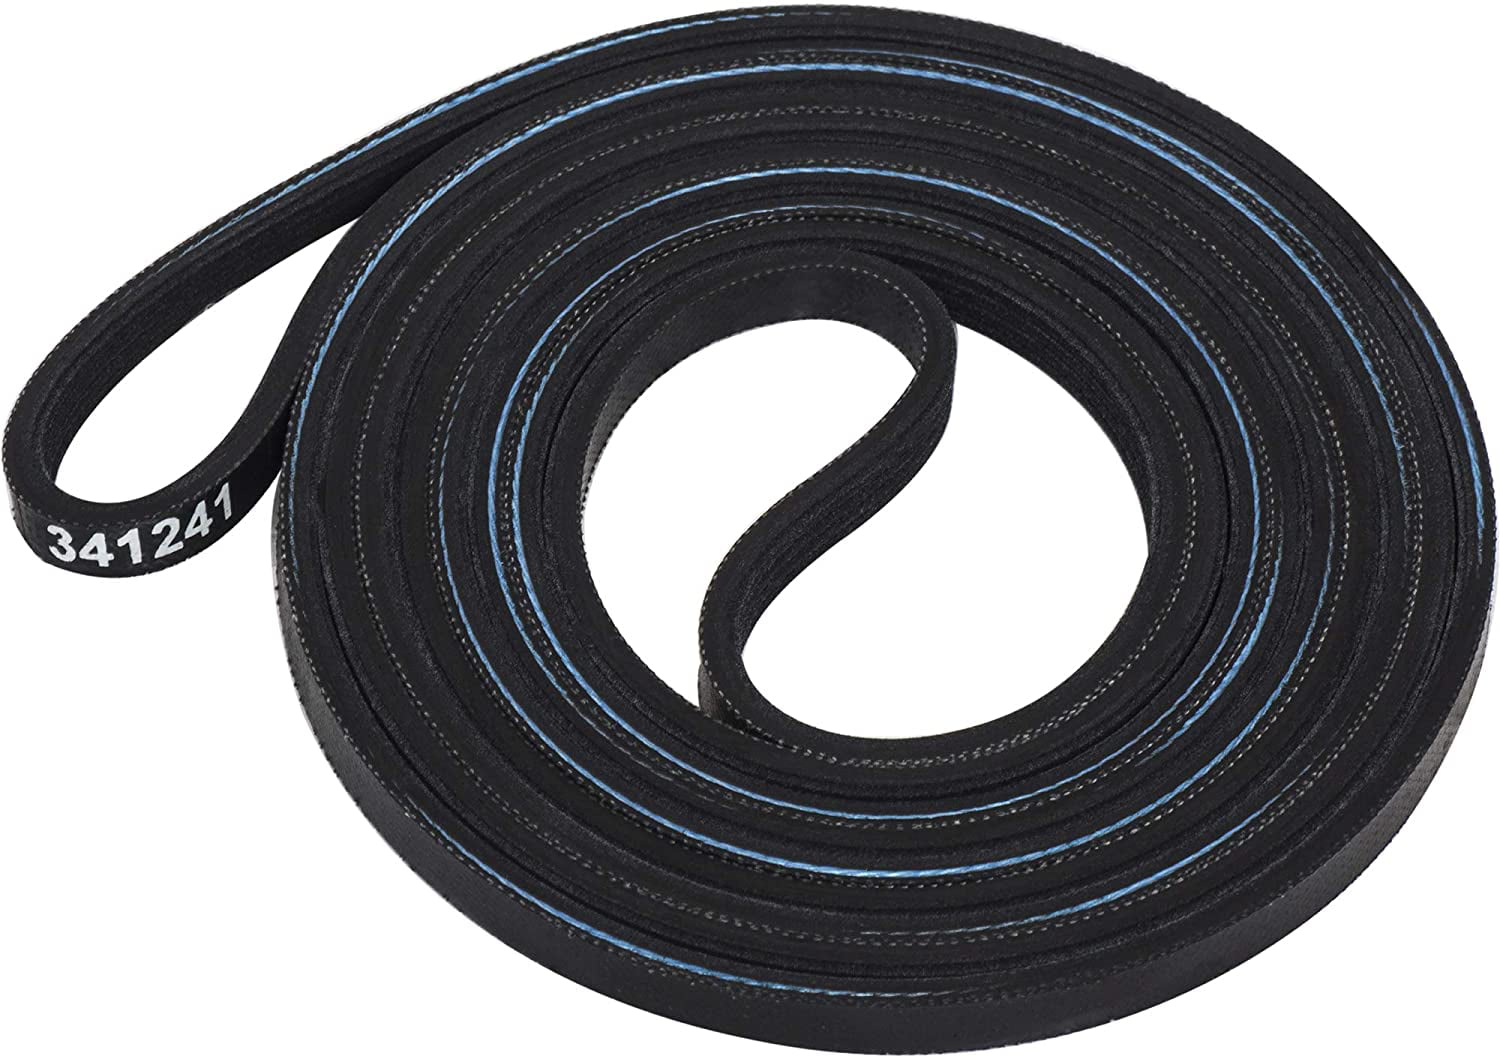 31531589 NEW MAYTAG DRYER REPLACEMENT BELT 